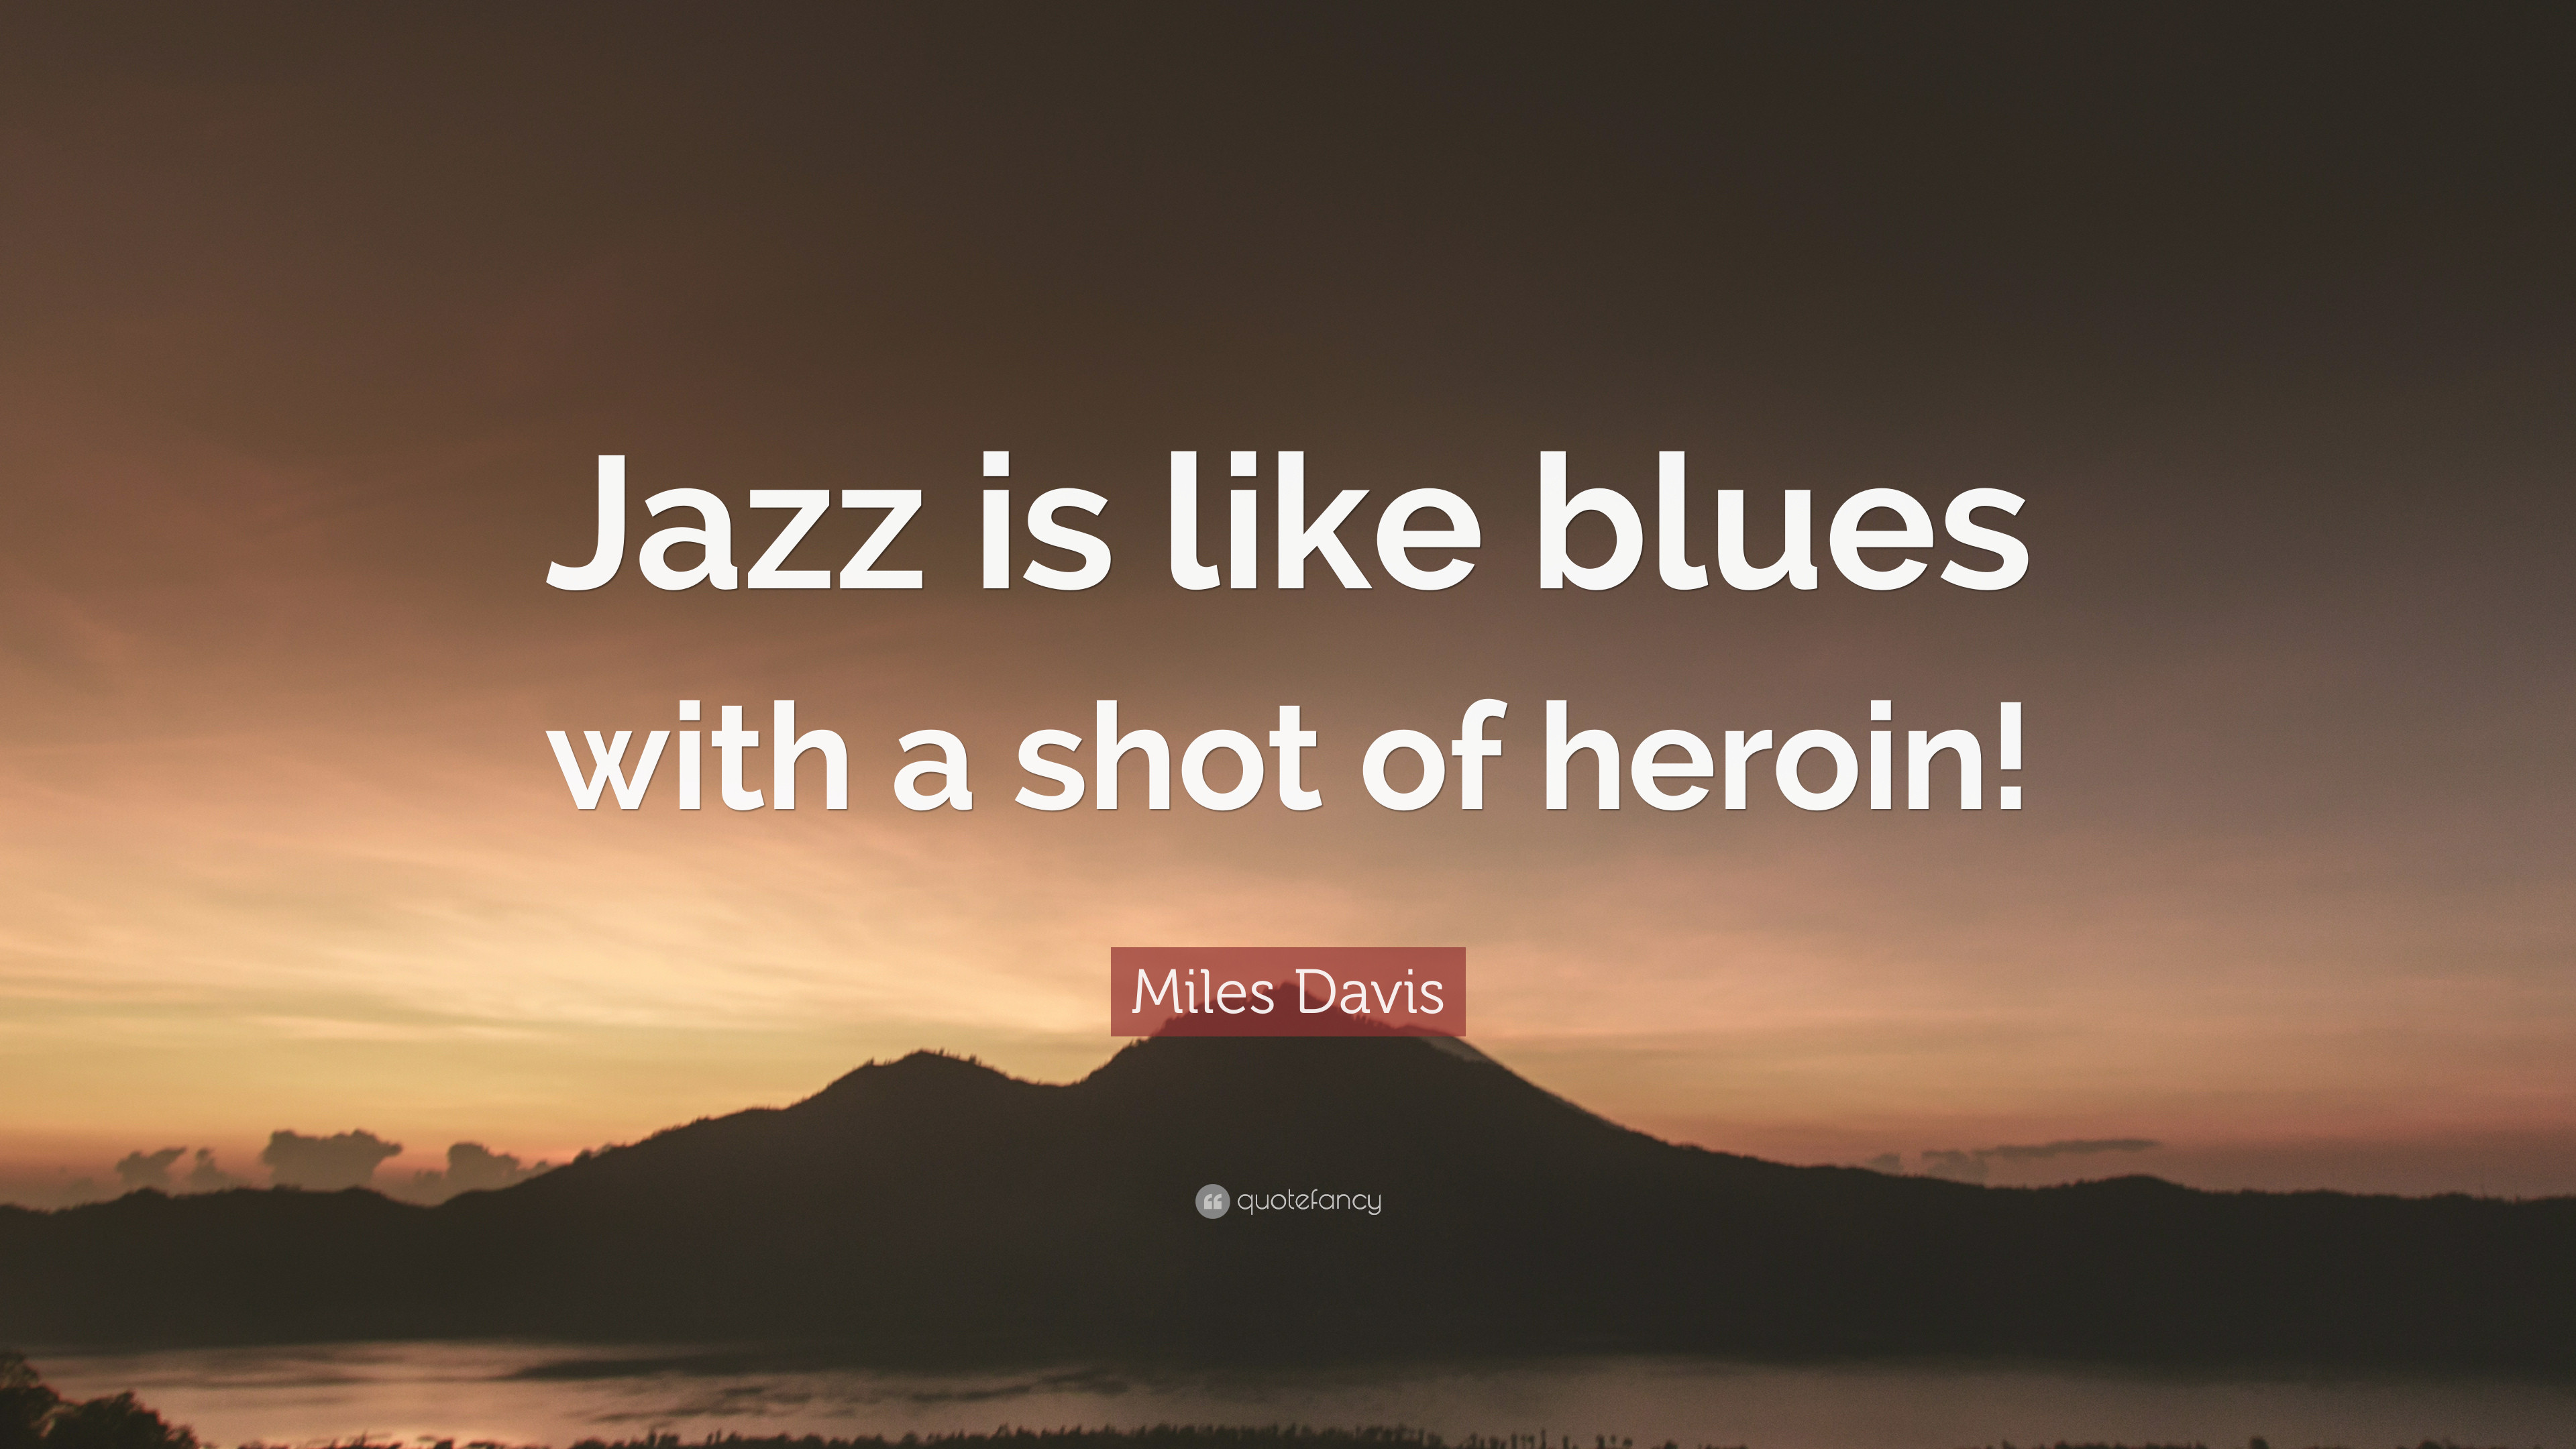 3840x2160 Miles Davis Quote: “Jazz is like blues with a shot of heroin!”